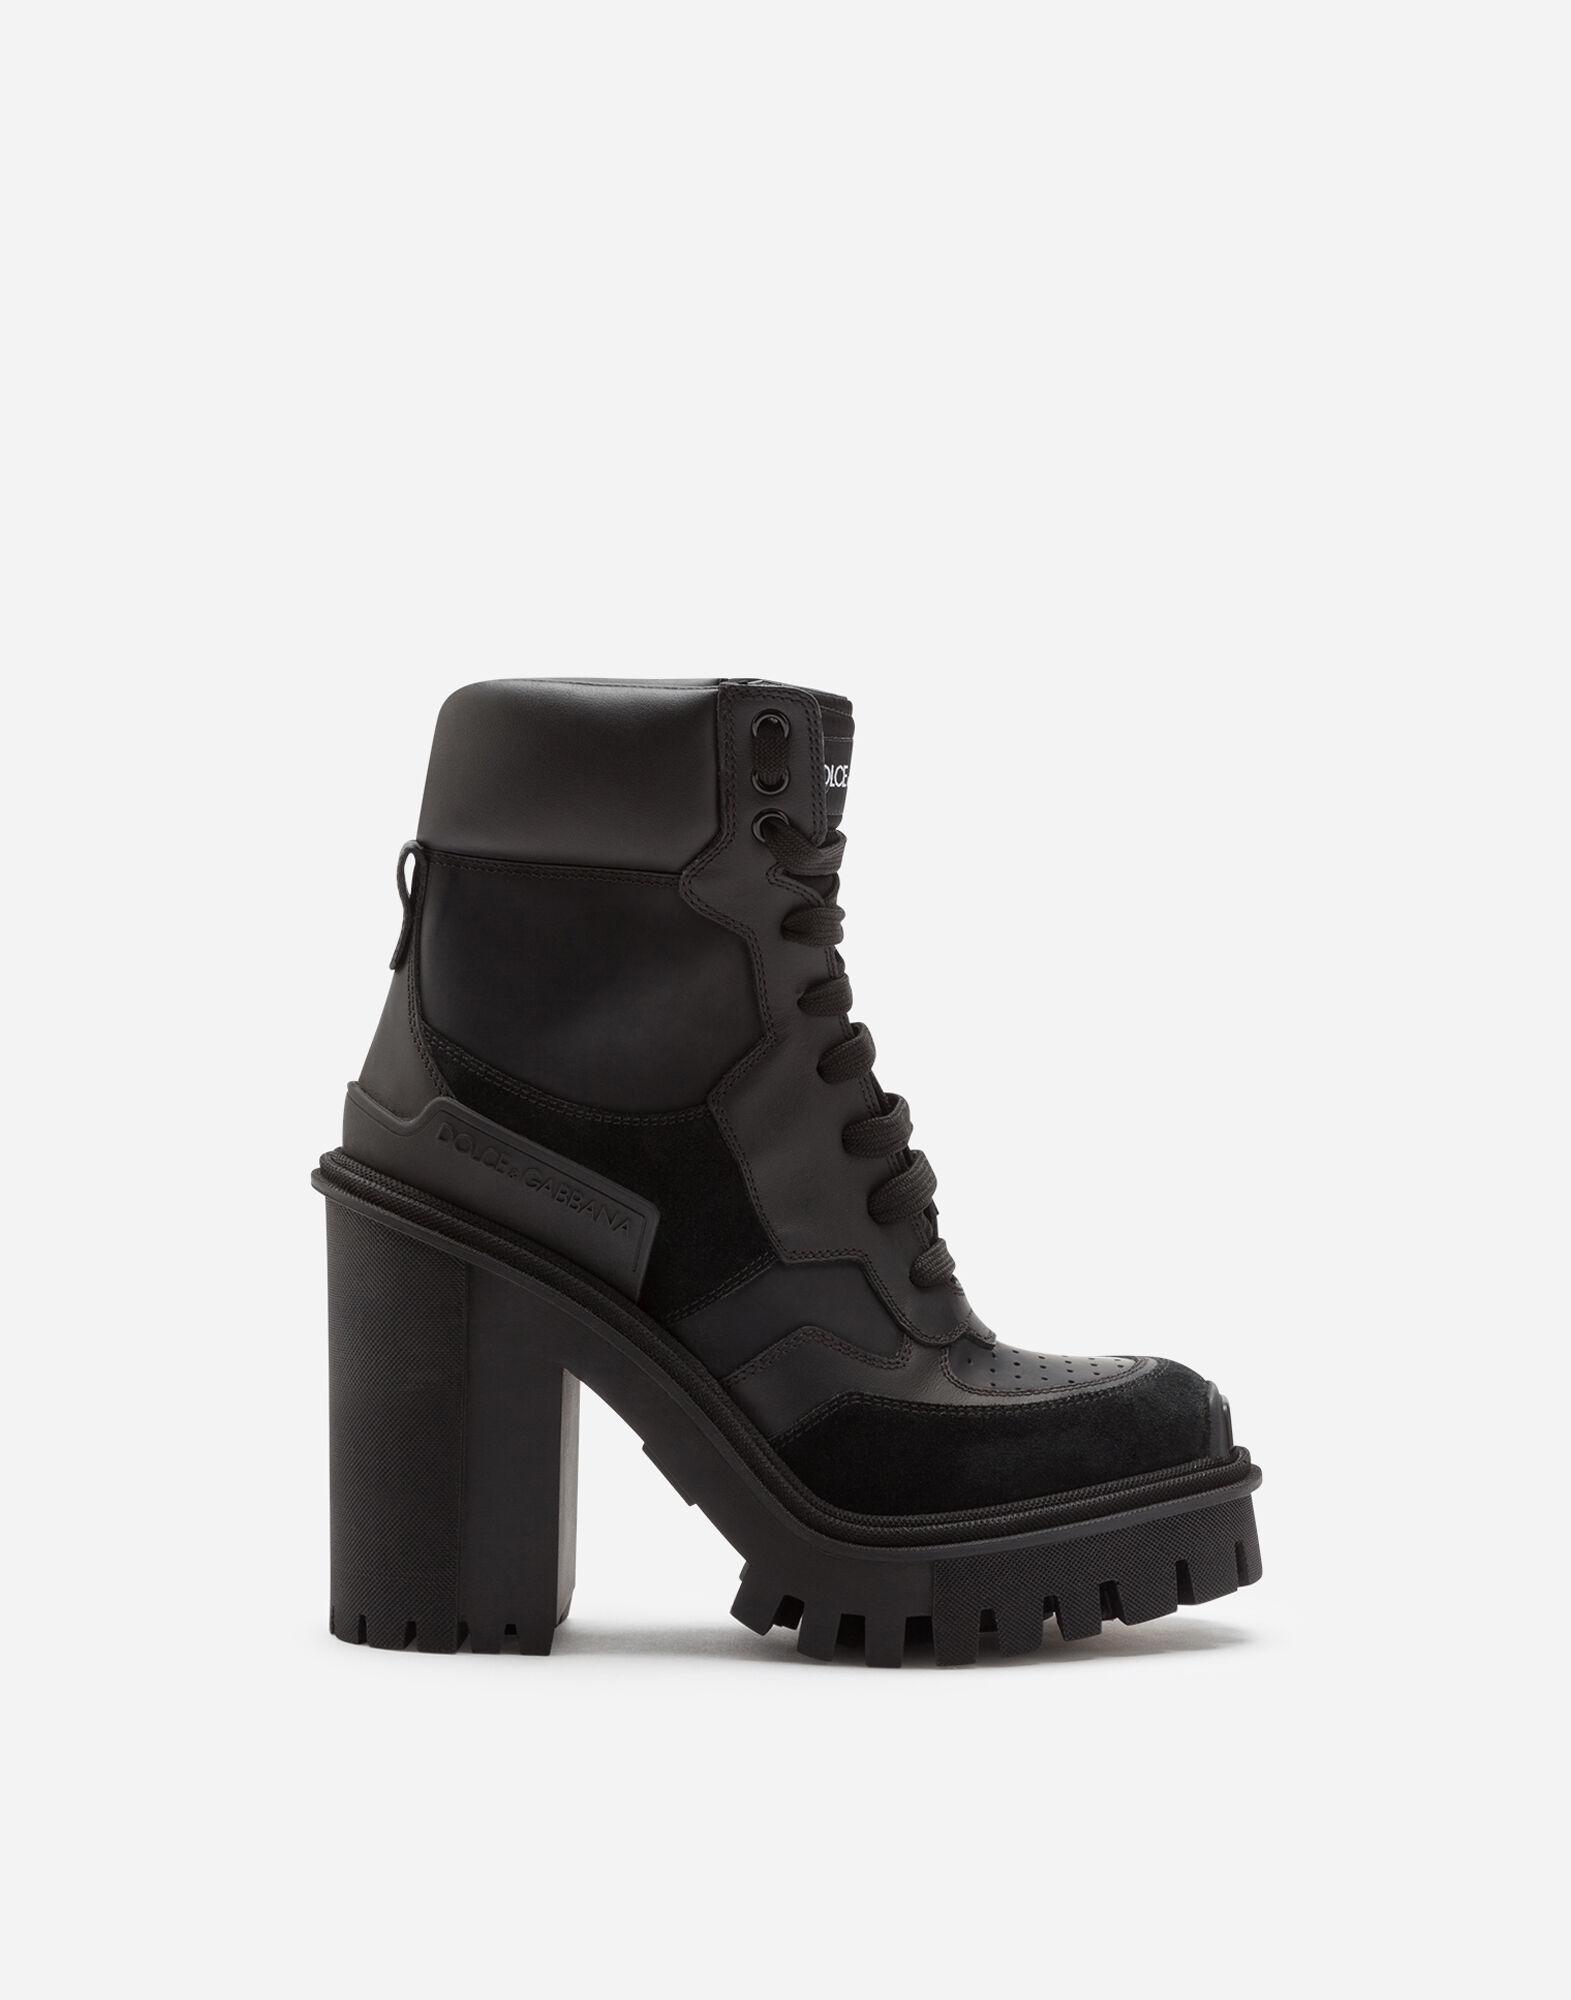 Dolce & Gabbana Cashmere Mixed-material Trekking Boots in Black - Lyst